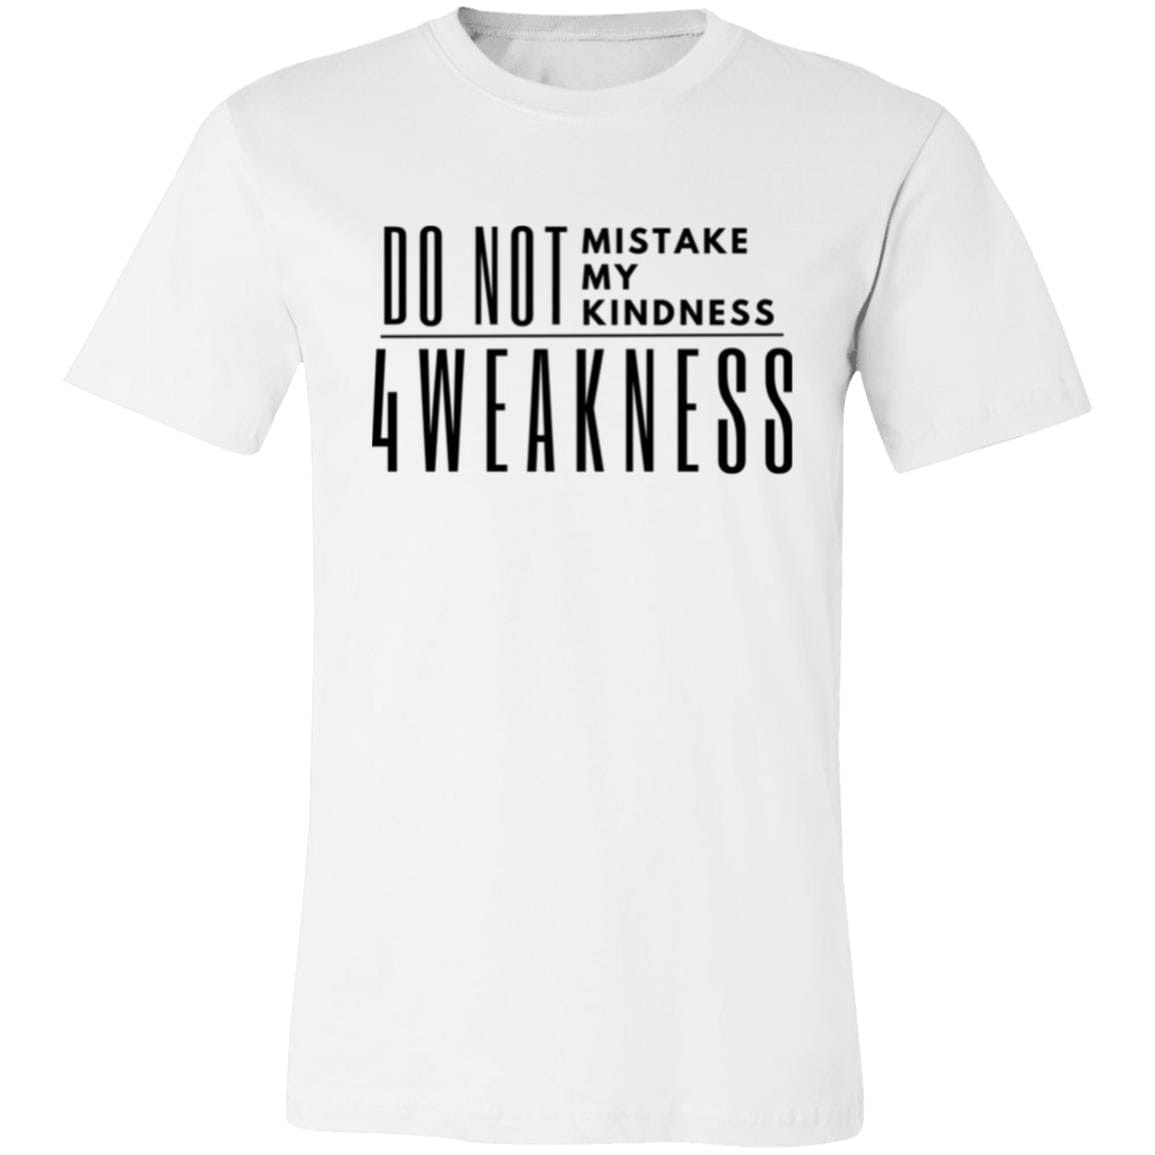 Do Not Mistake My Kindness 4Weakness Men's Every day Tshirt